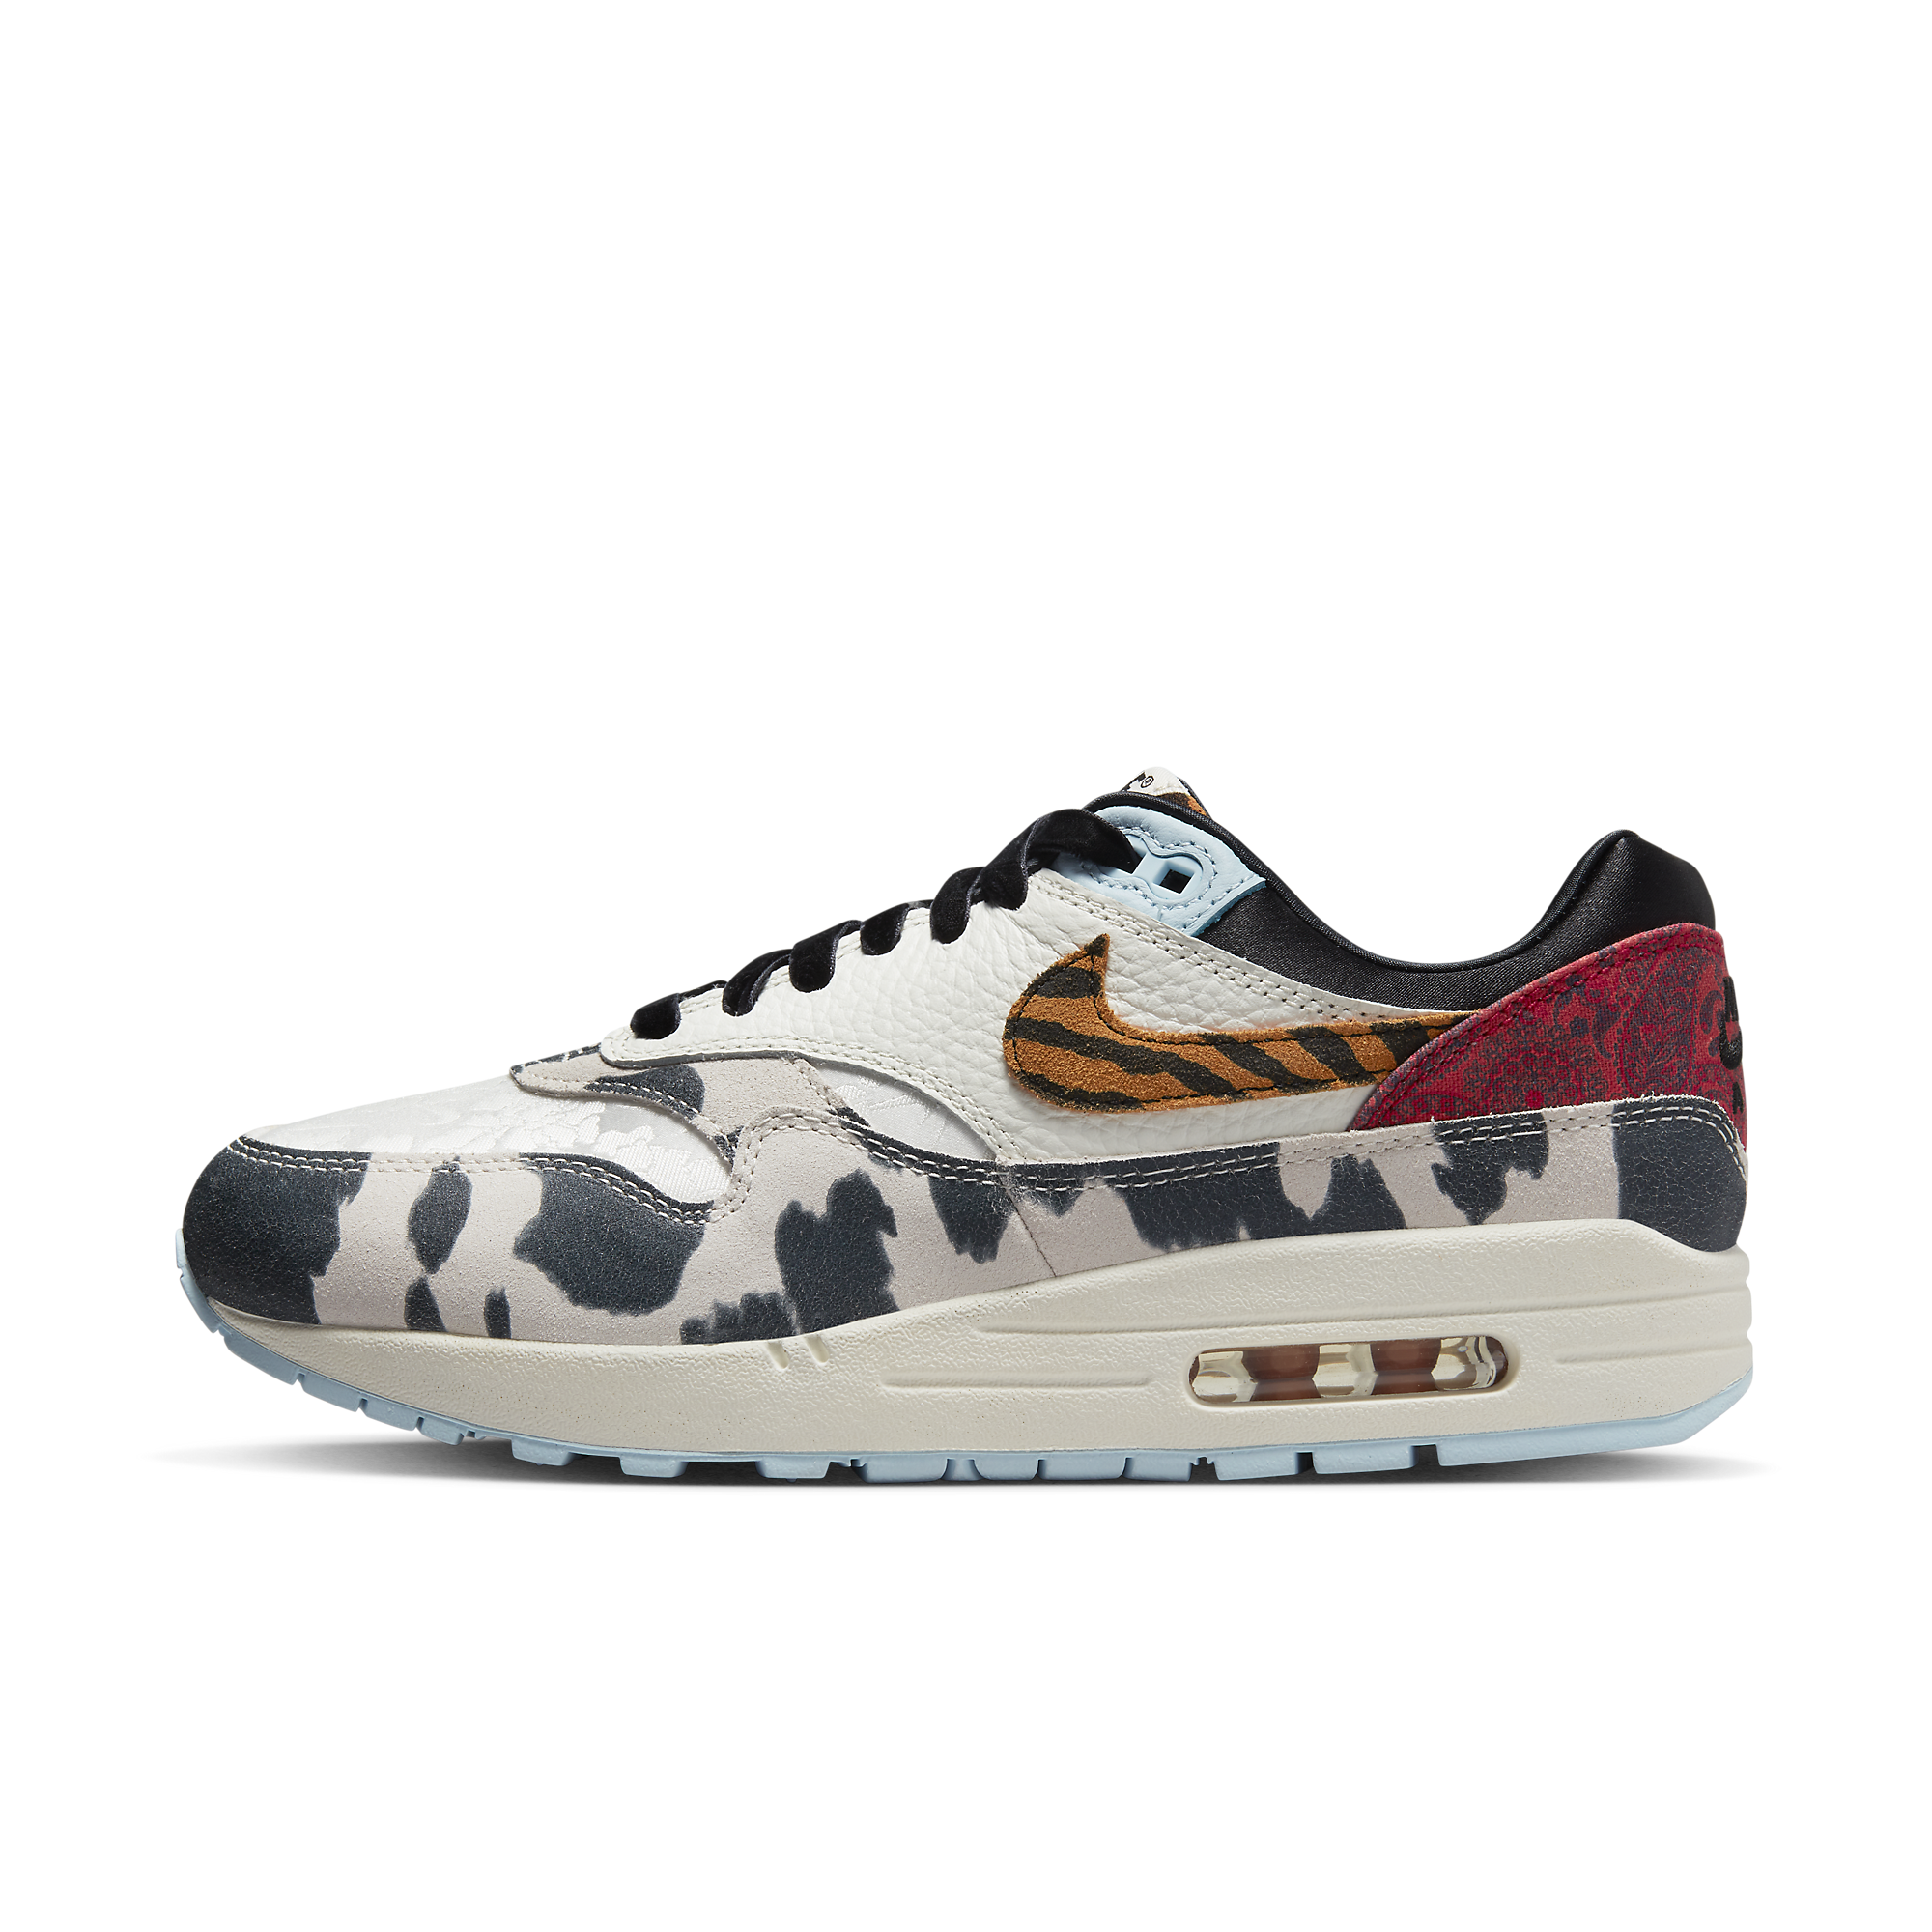 Women's Air Max 1 '87 "Great Indoors"